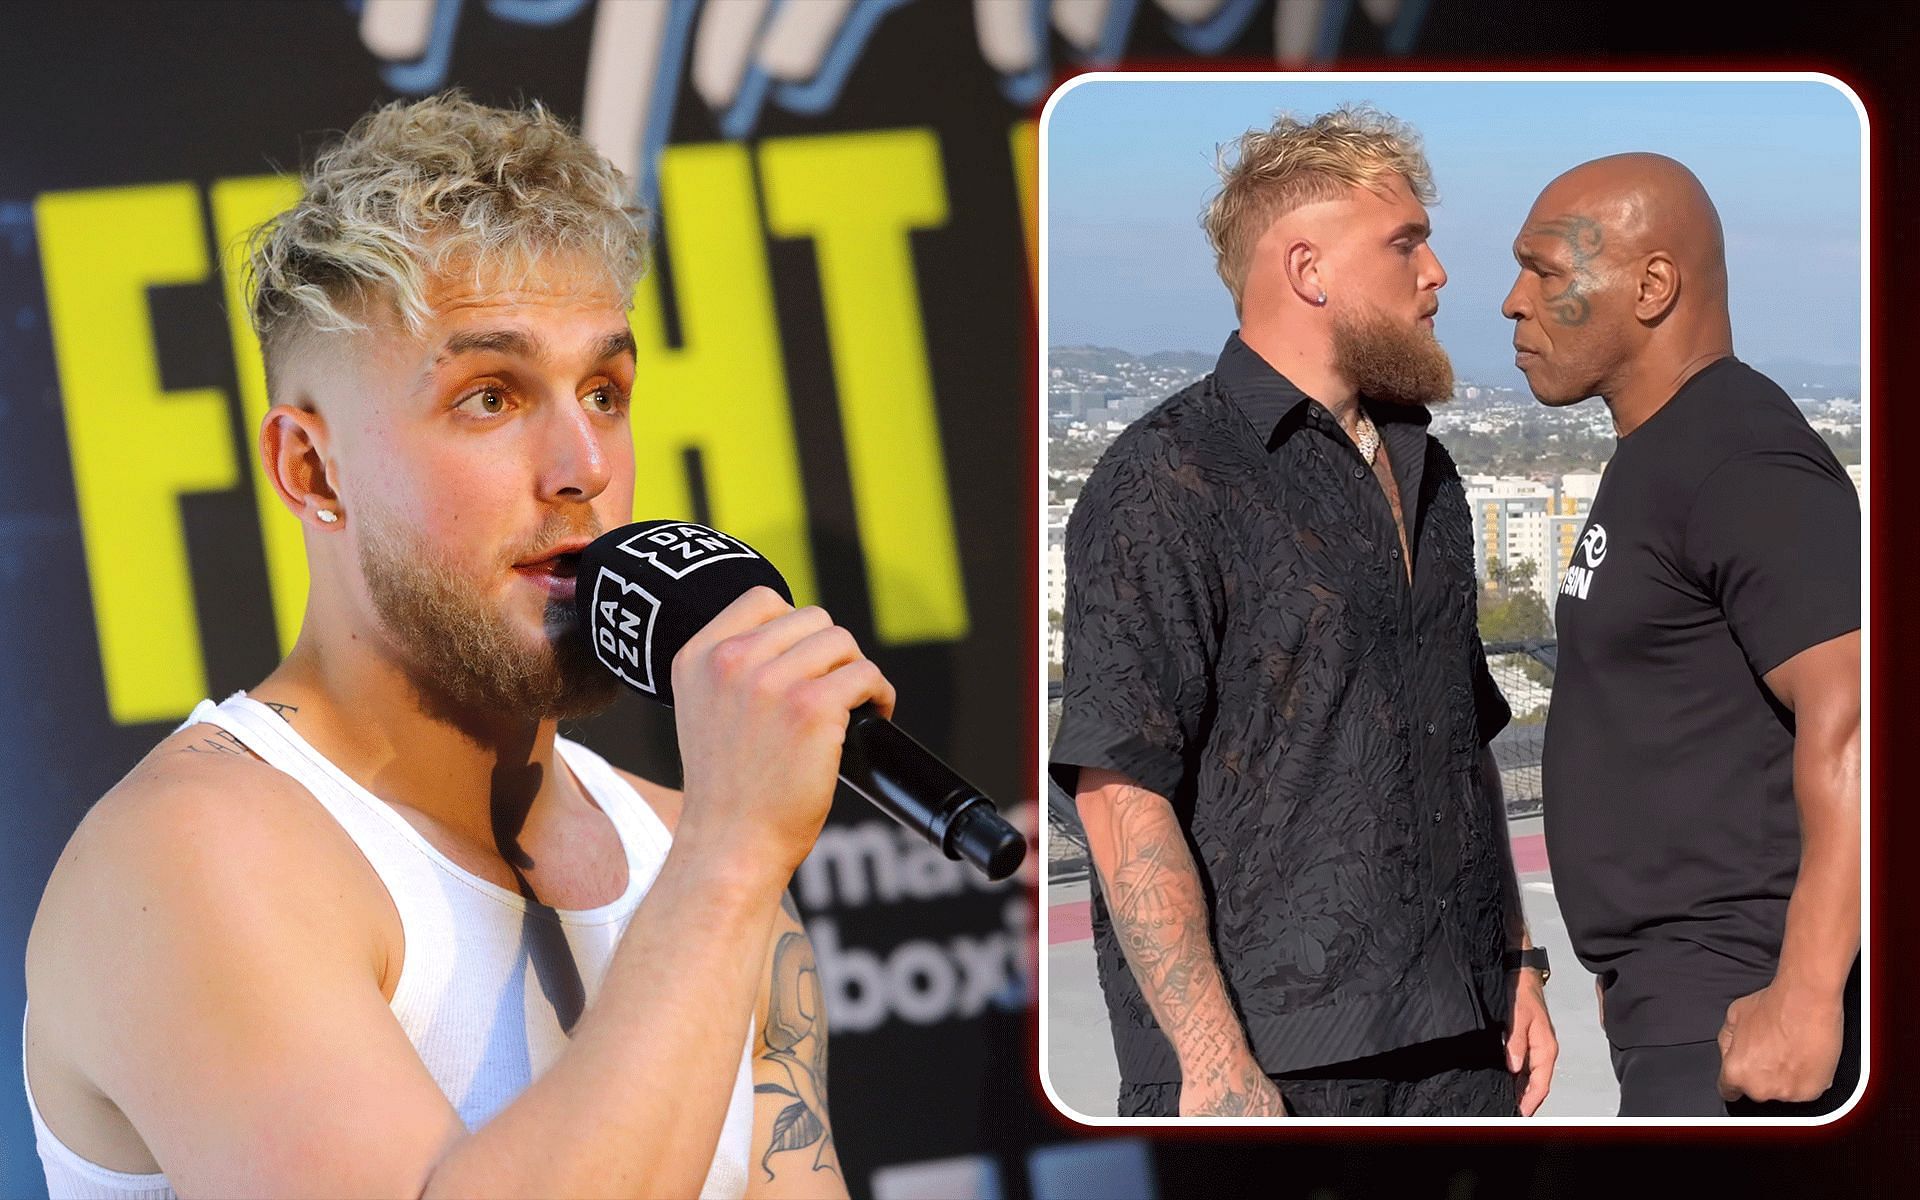 Jake Paul (left) predicts his fight against Mike Tyson (right) [Images courtesy: @jakepaul on Instagram and Getty]